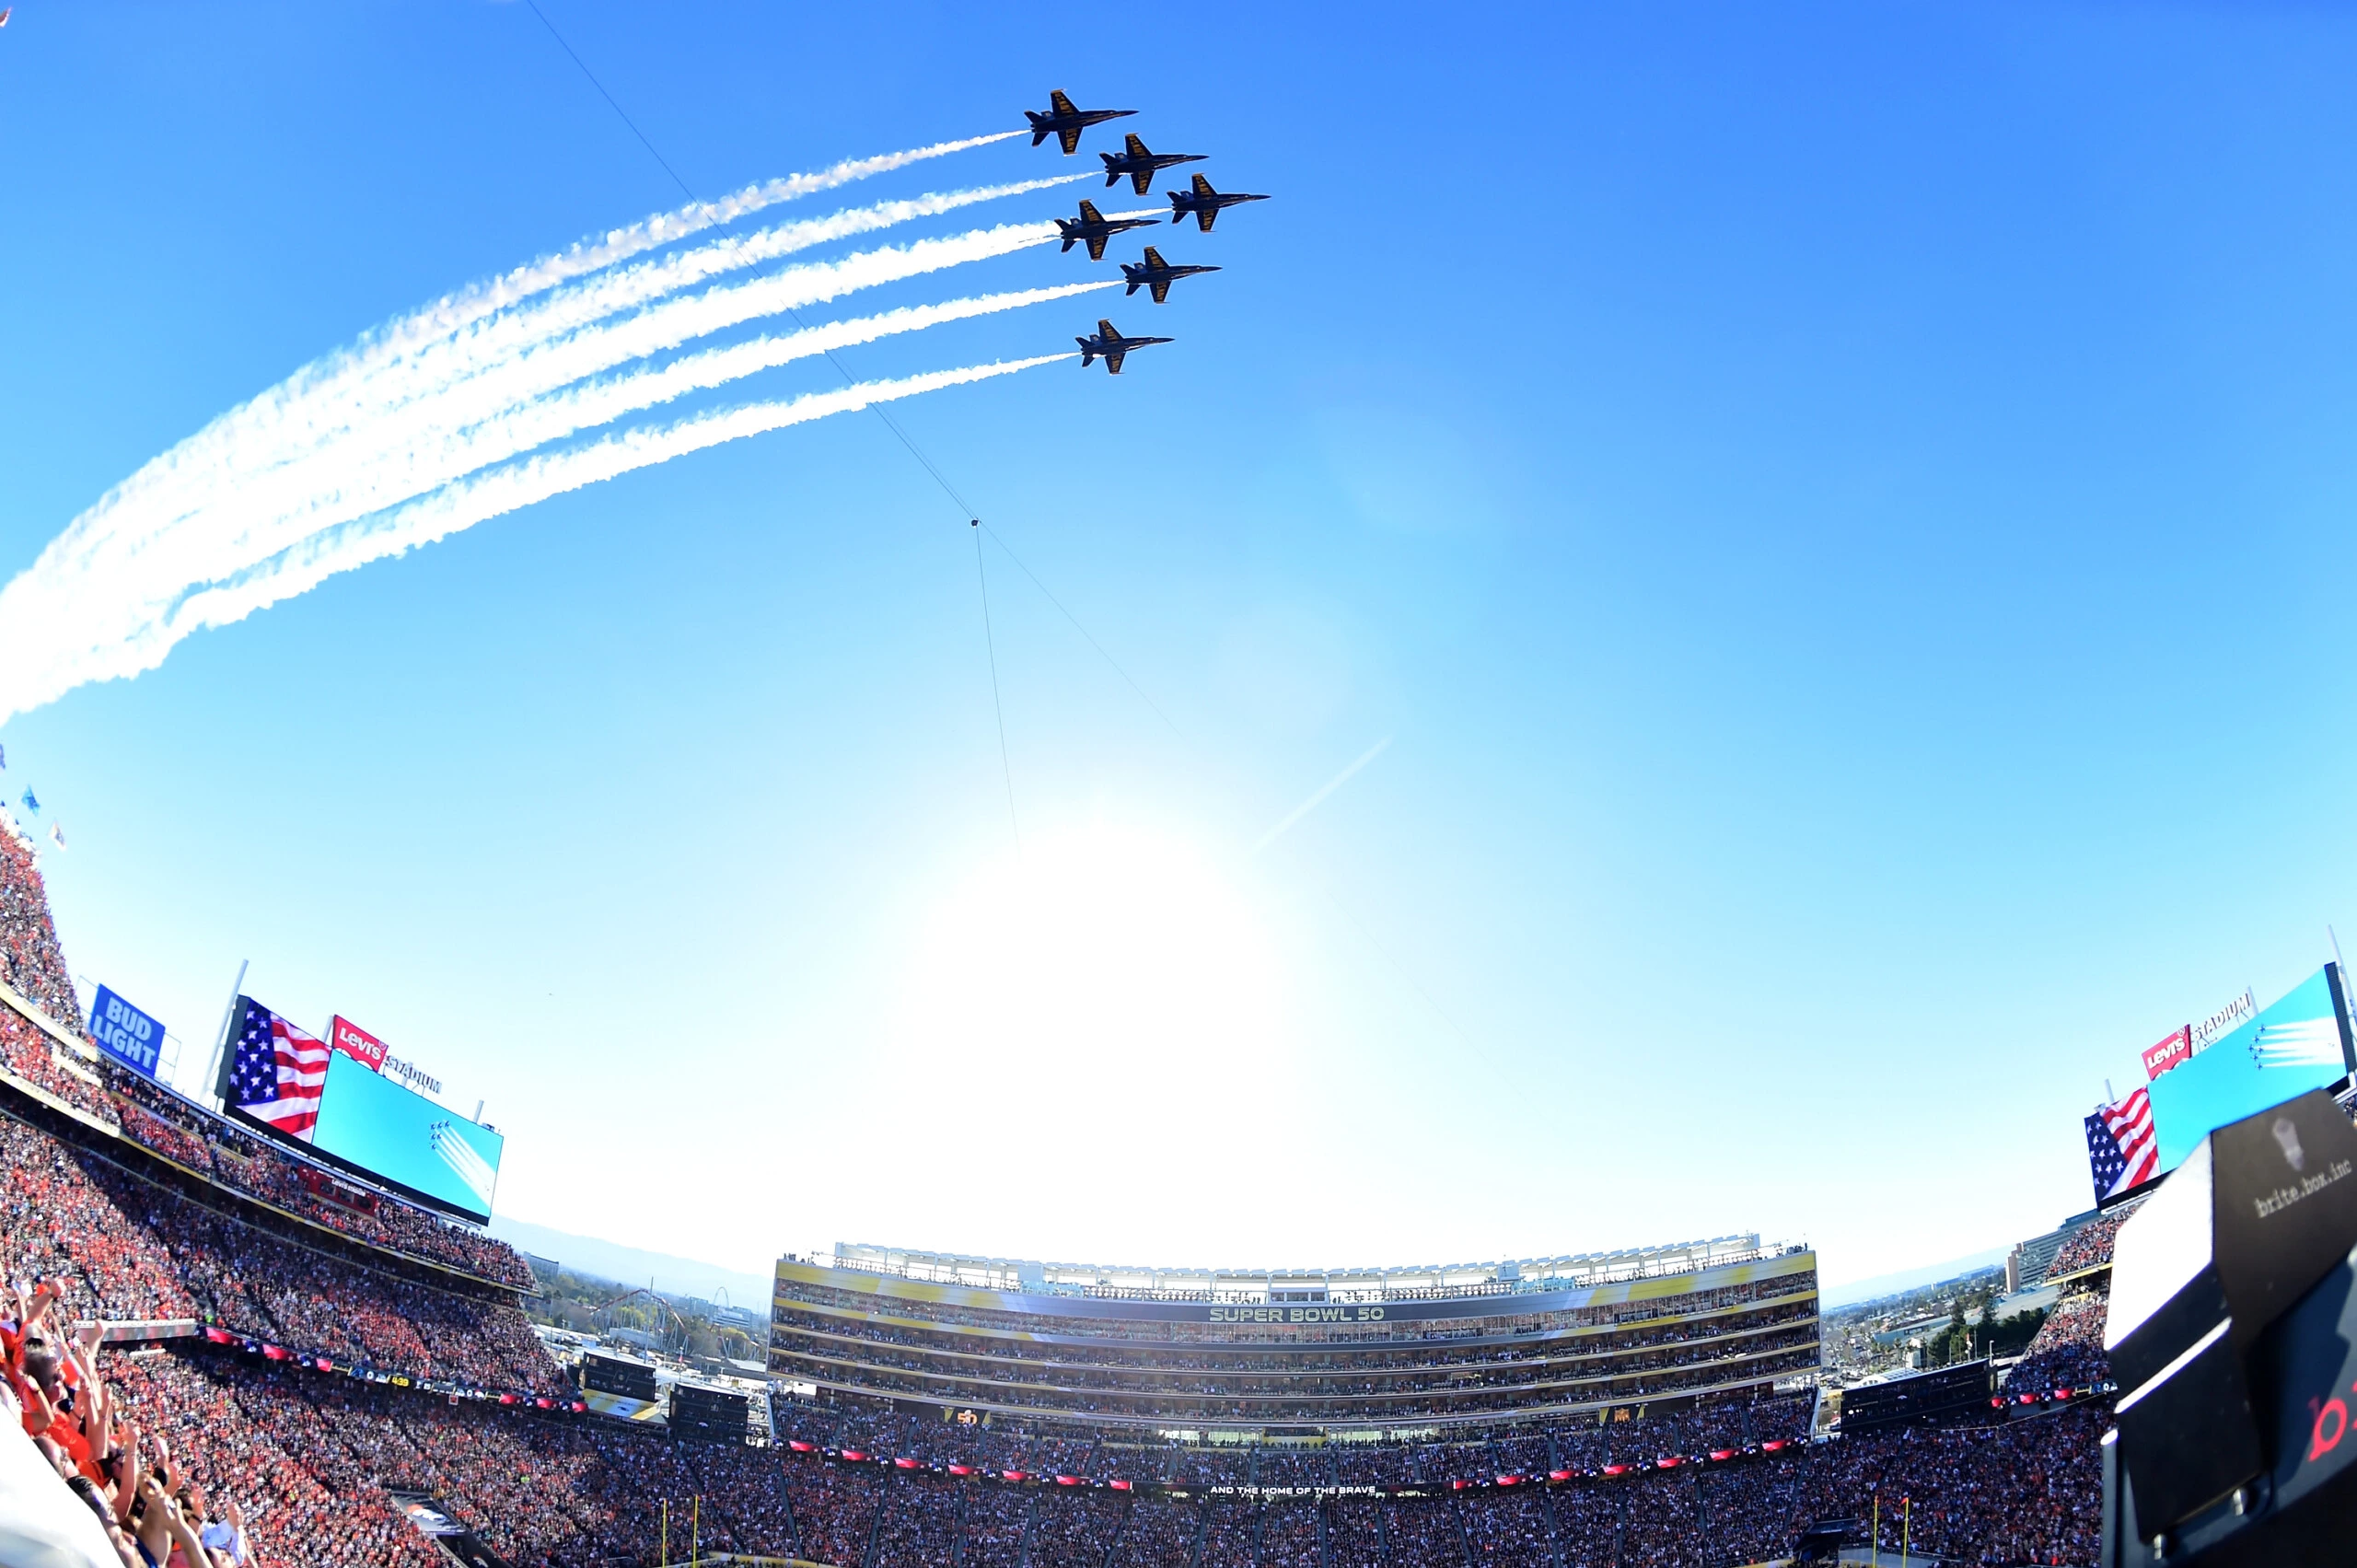 SANTA CLARA, CA - FEBRUARY 07:  The Blue Angels perform a fly-over prior to Super Bowl 50 between the Denver Broncos and the Carolina Panthers at Levi's Stadium on February 7, 2016 in Santa Clara, California.  (Photo by Harry How/Getty Images)